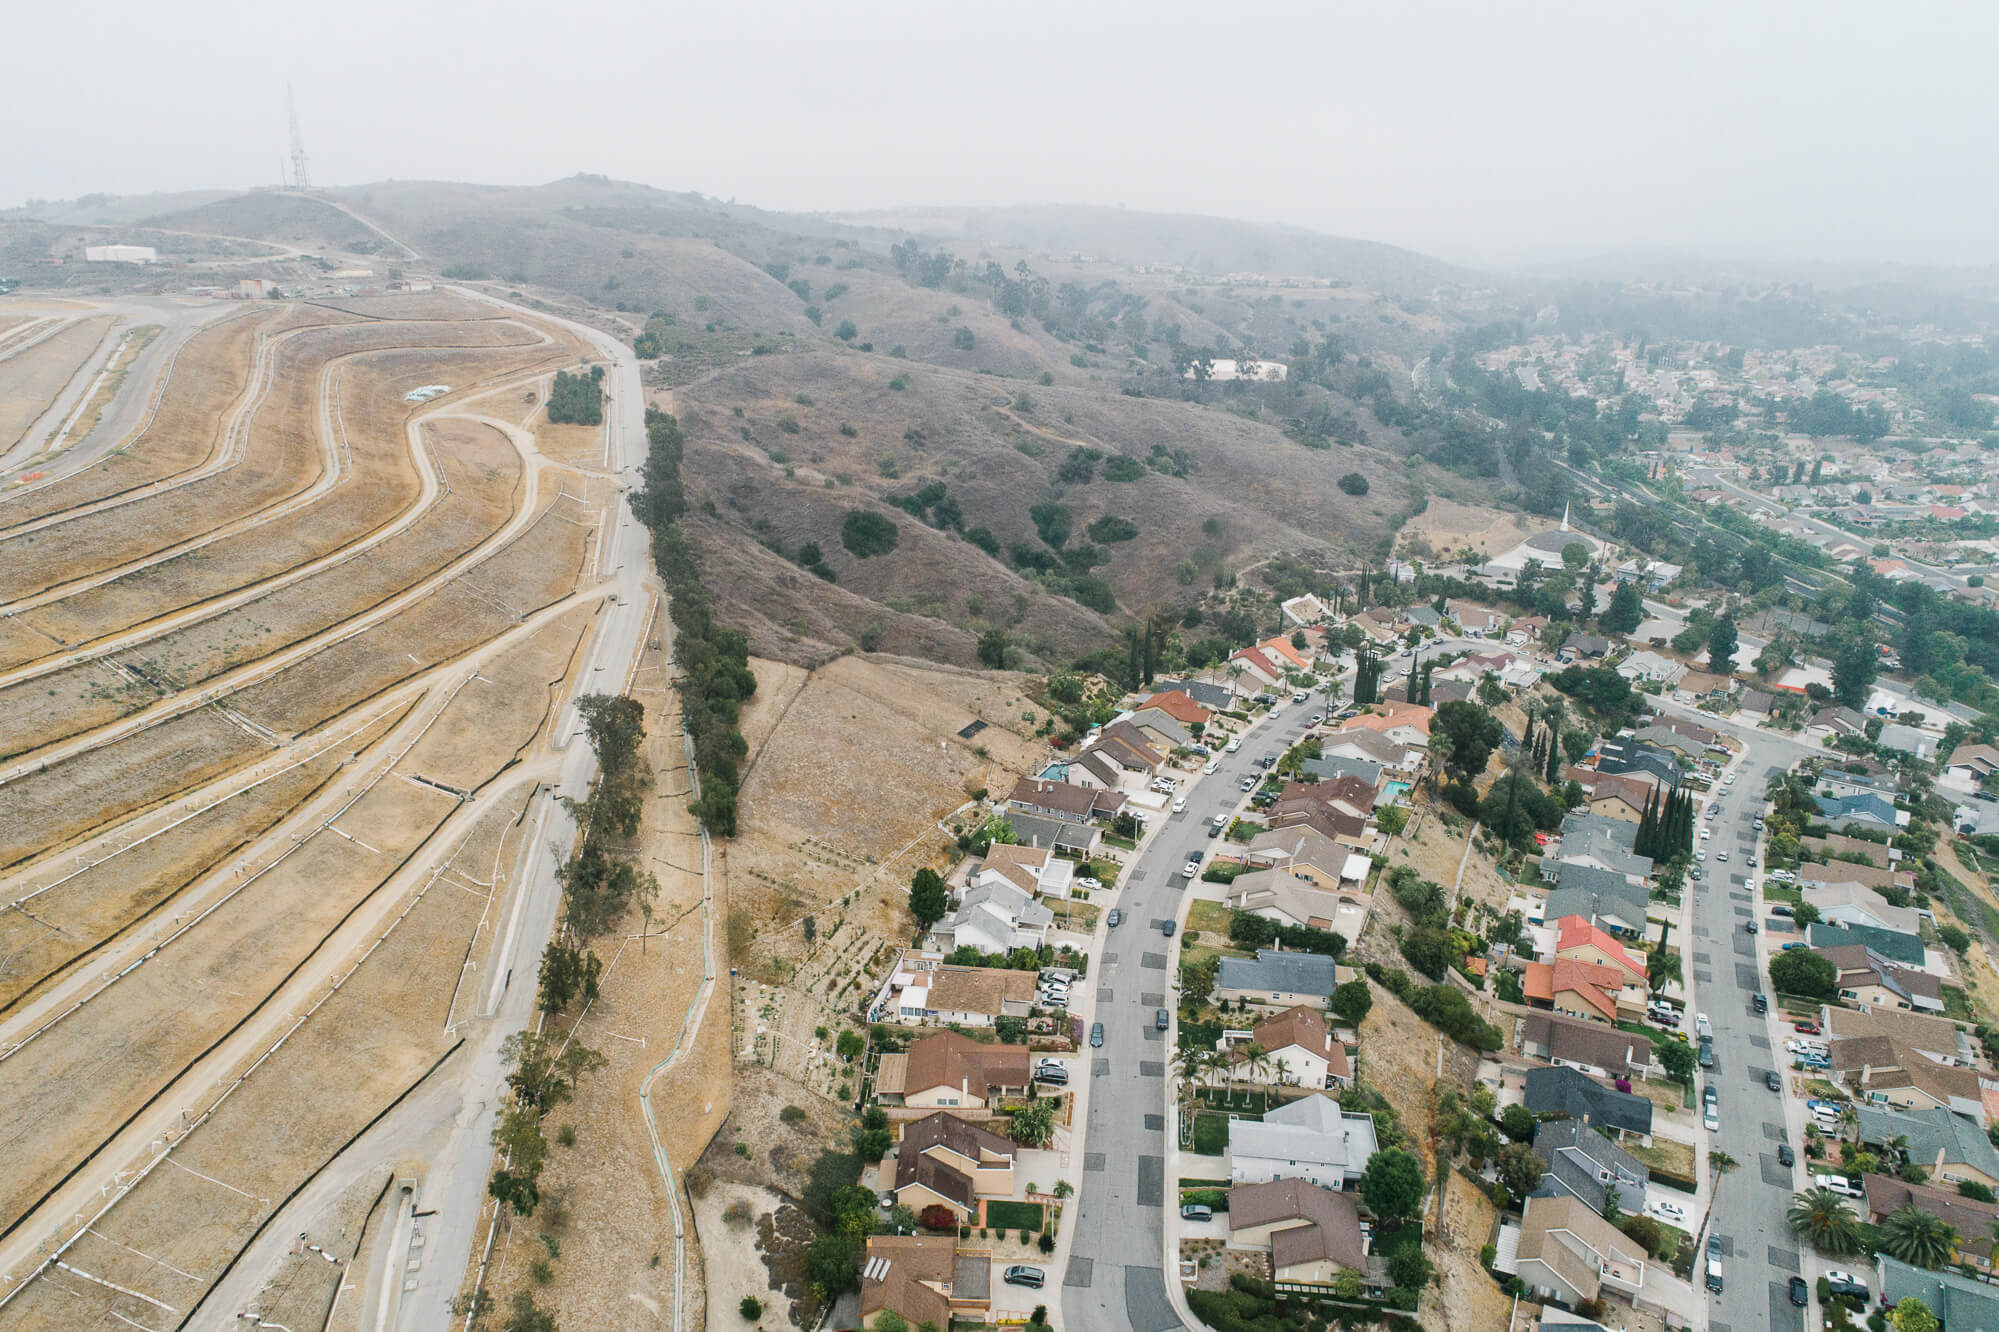 The BKK Landfill holds the potential to preserve hundreds of acres of open space in the highly developed West Covina area to benefit local communities and wildlife.